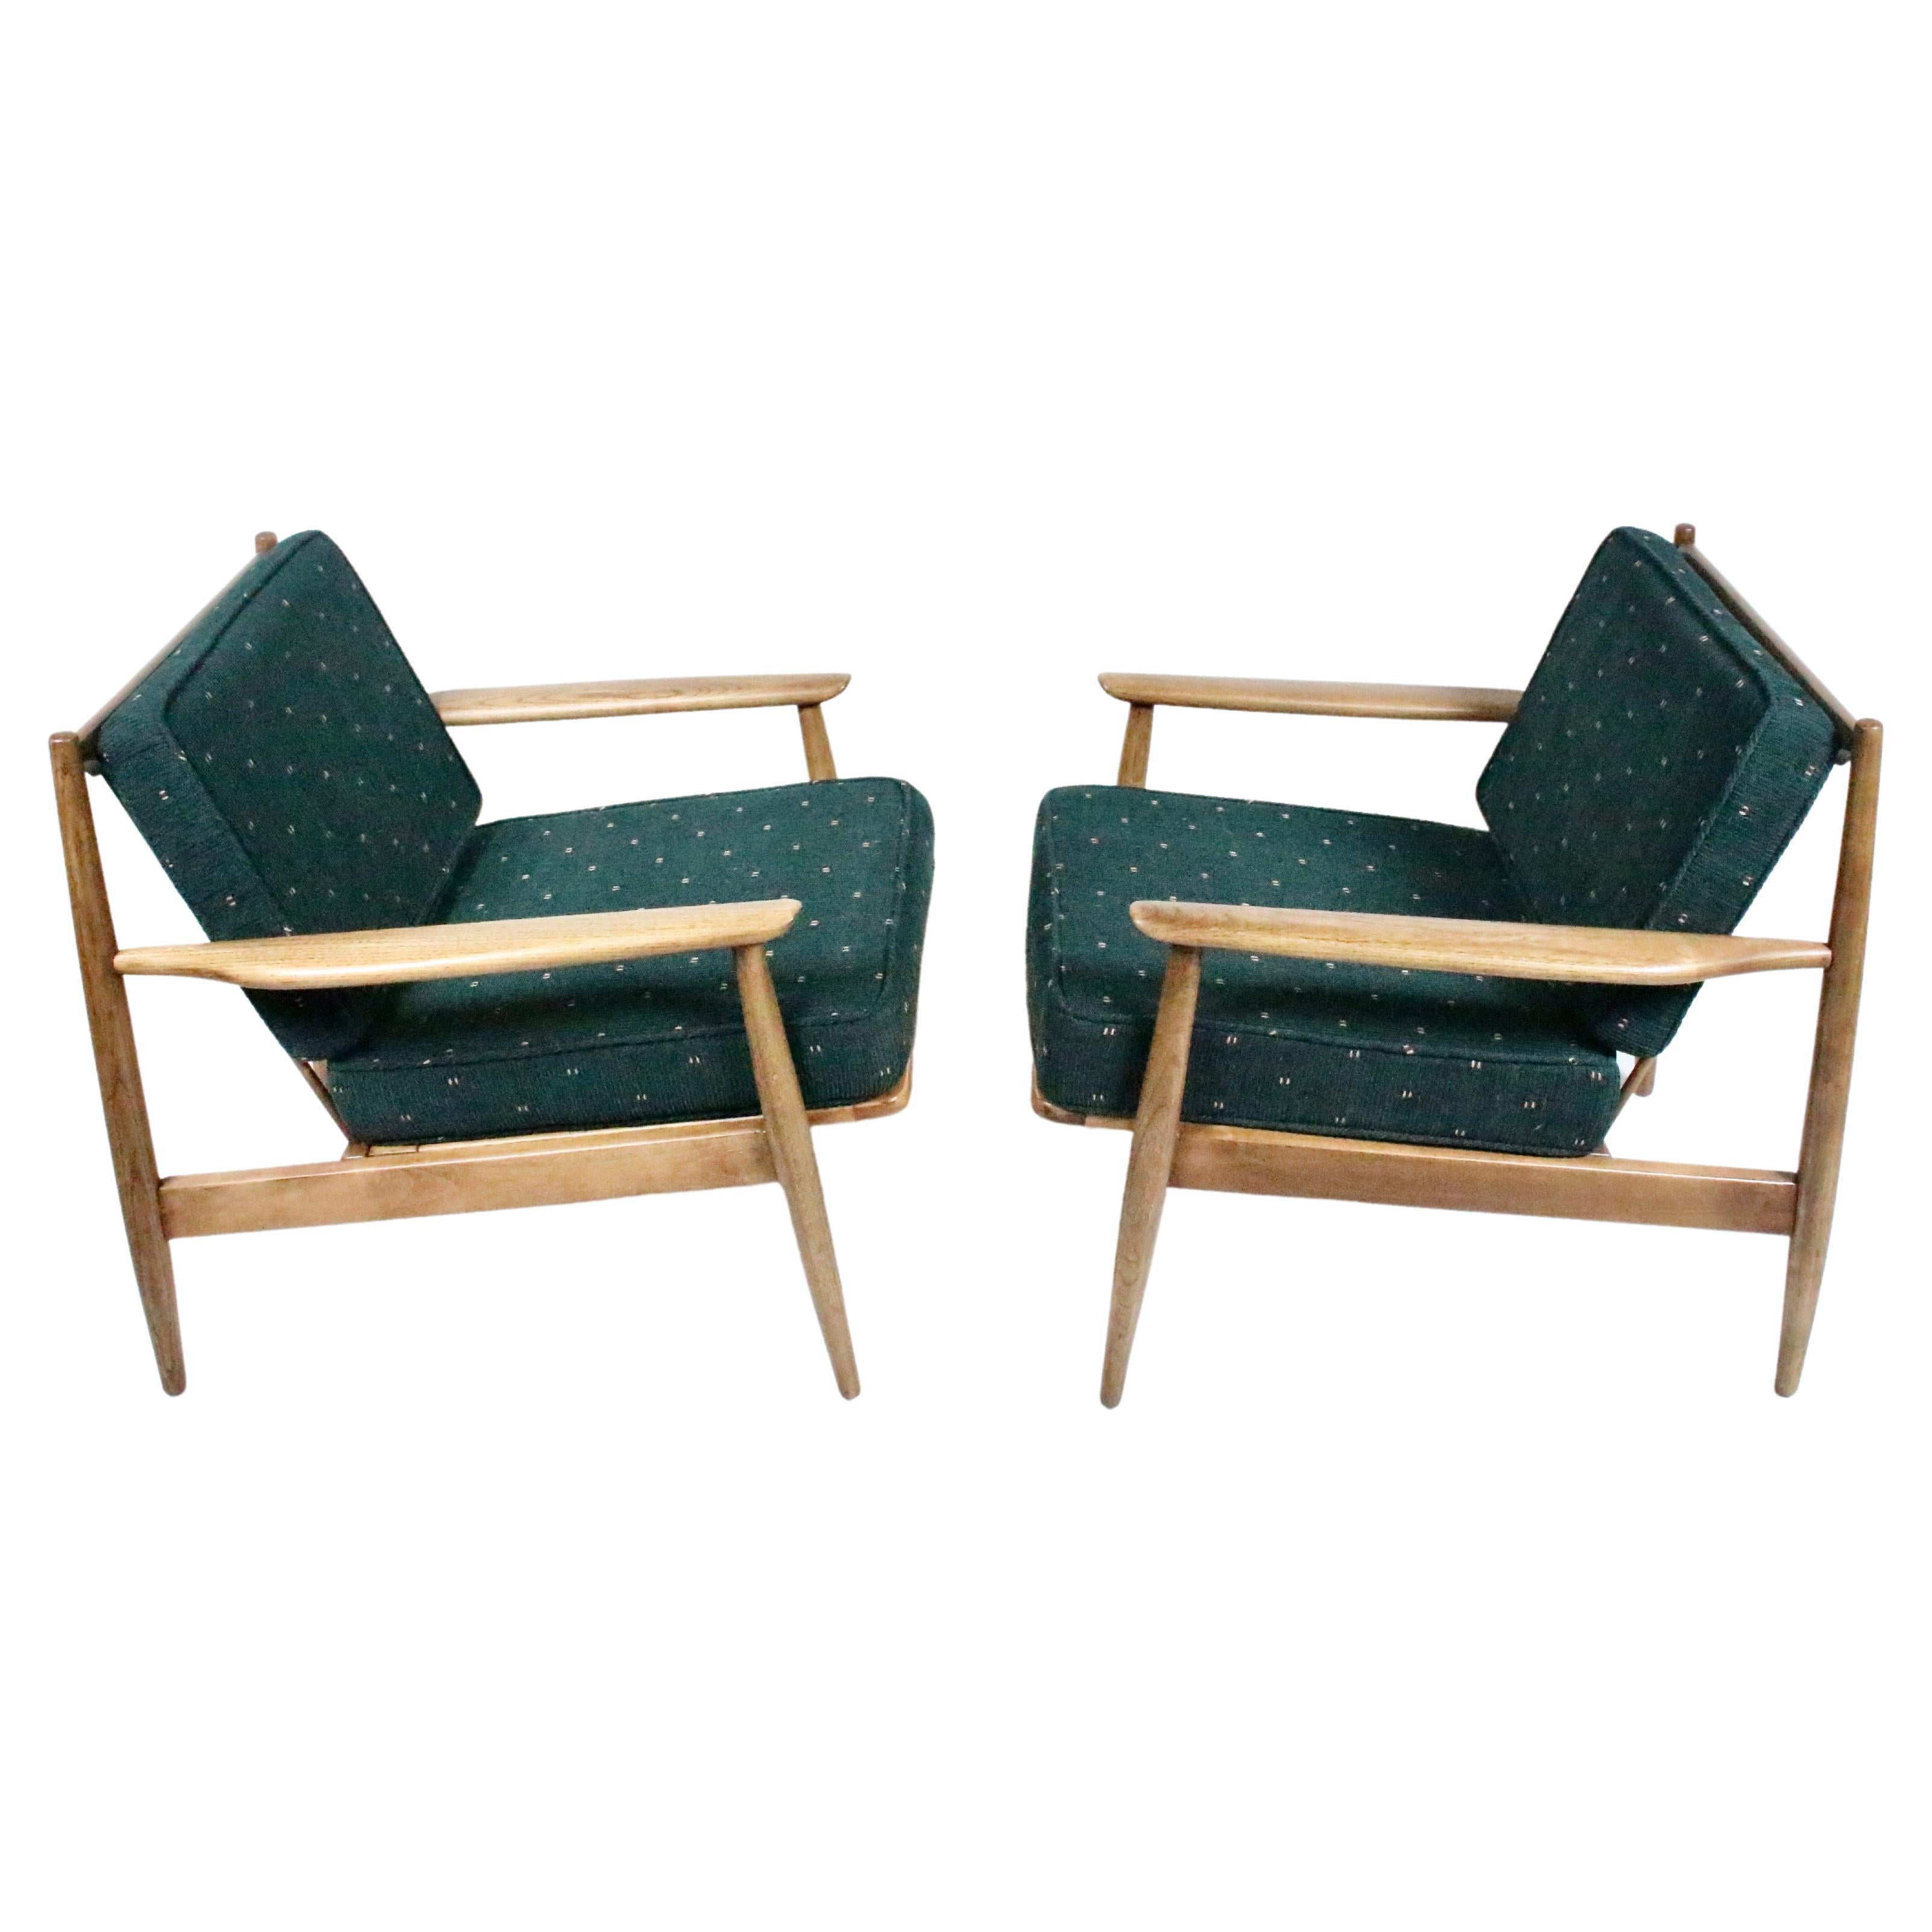 Pair of Danish Modern Viko Baumritter Style Walnut Lounge Chairs, 1950s For Sale